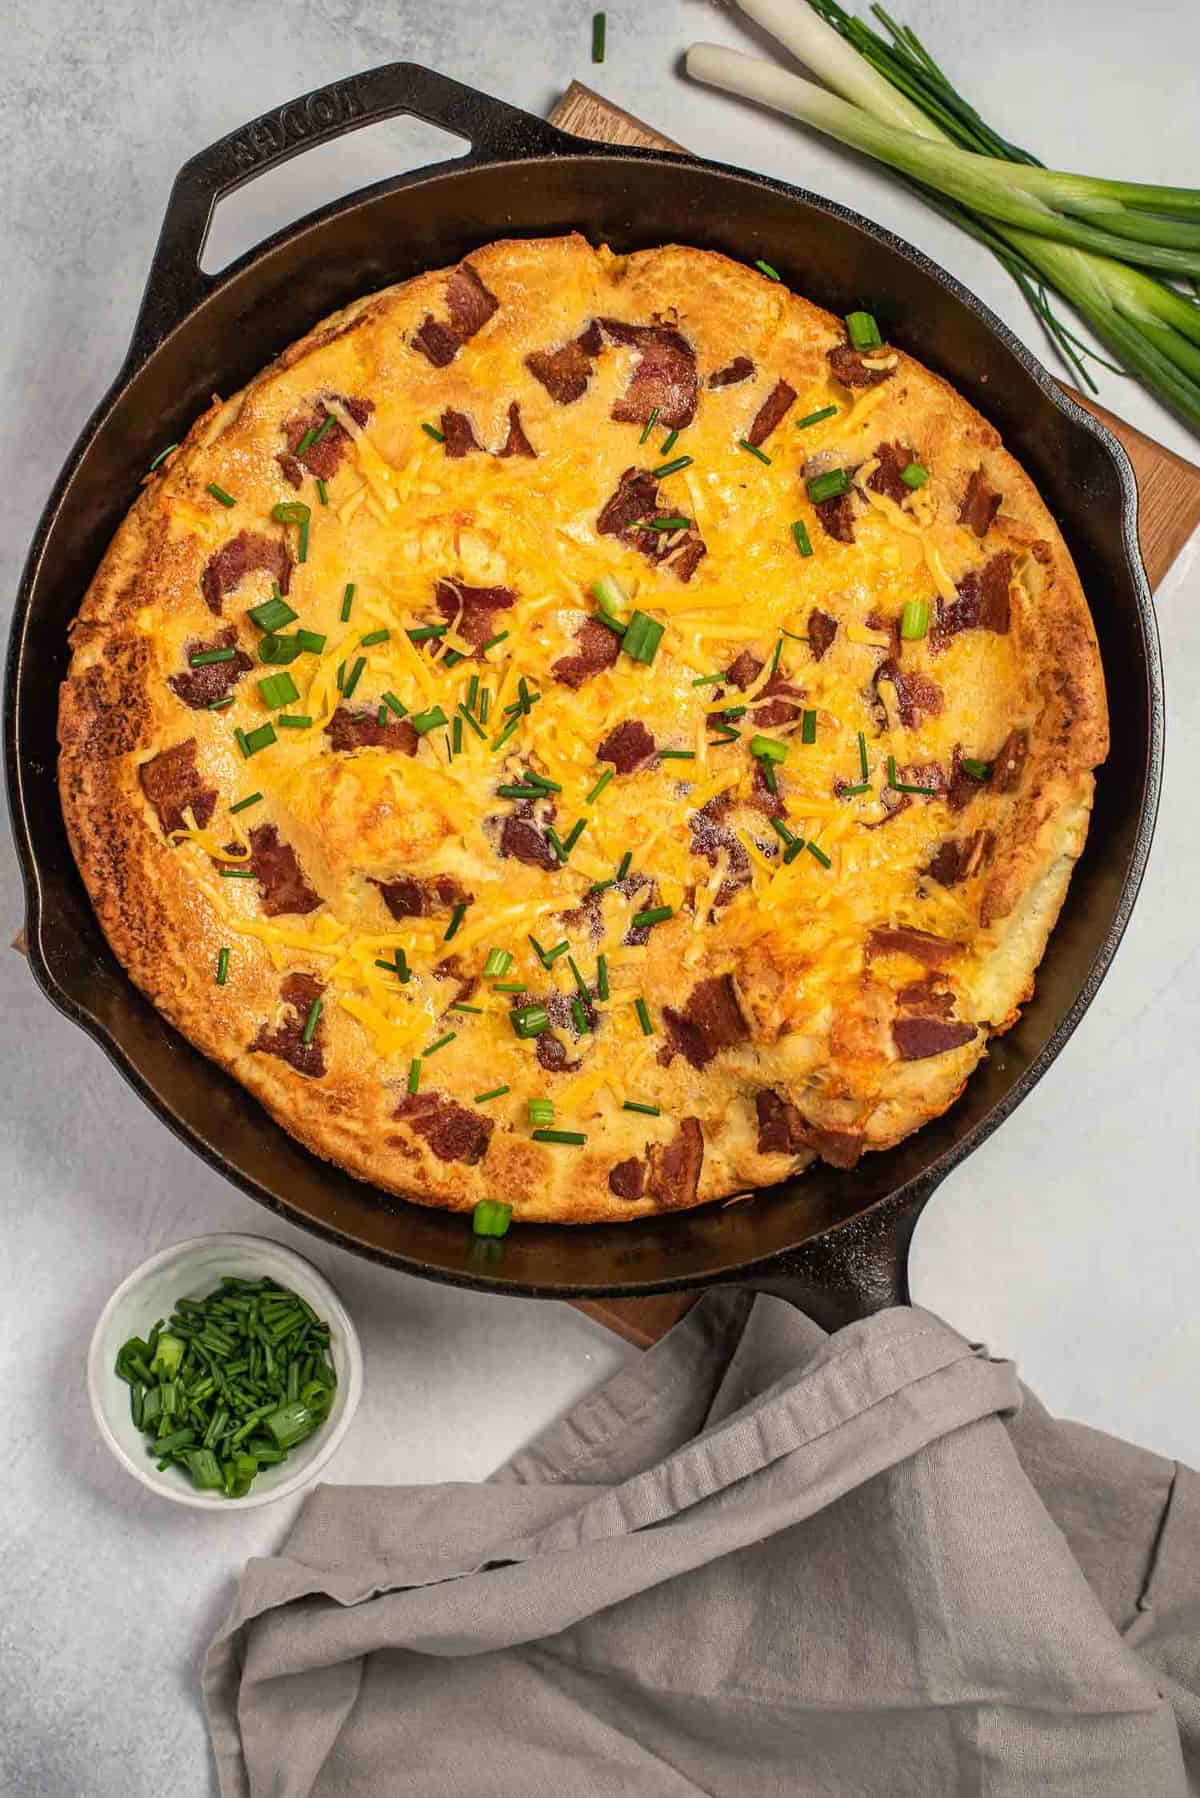 Overhead view of bacon dutch baby in a black skillet garnished with chives.